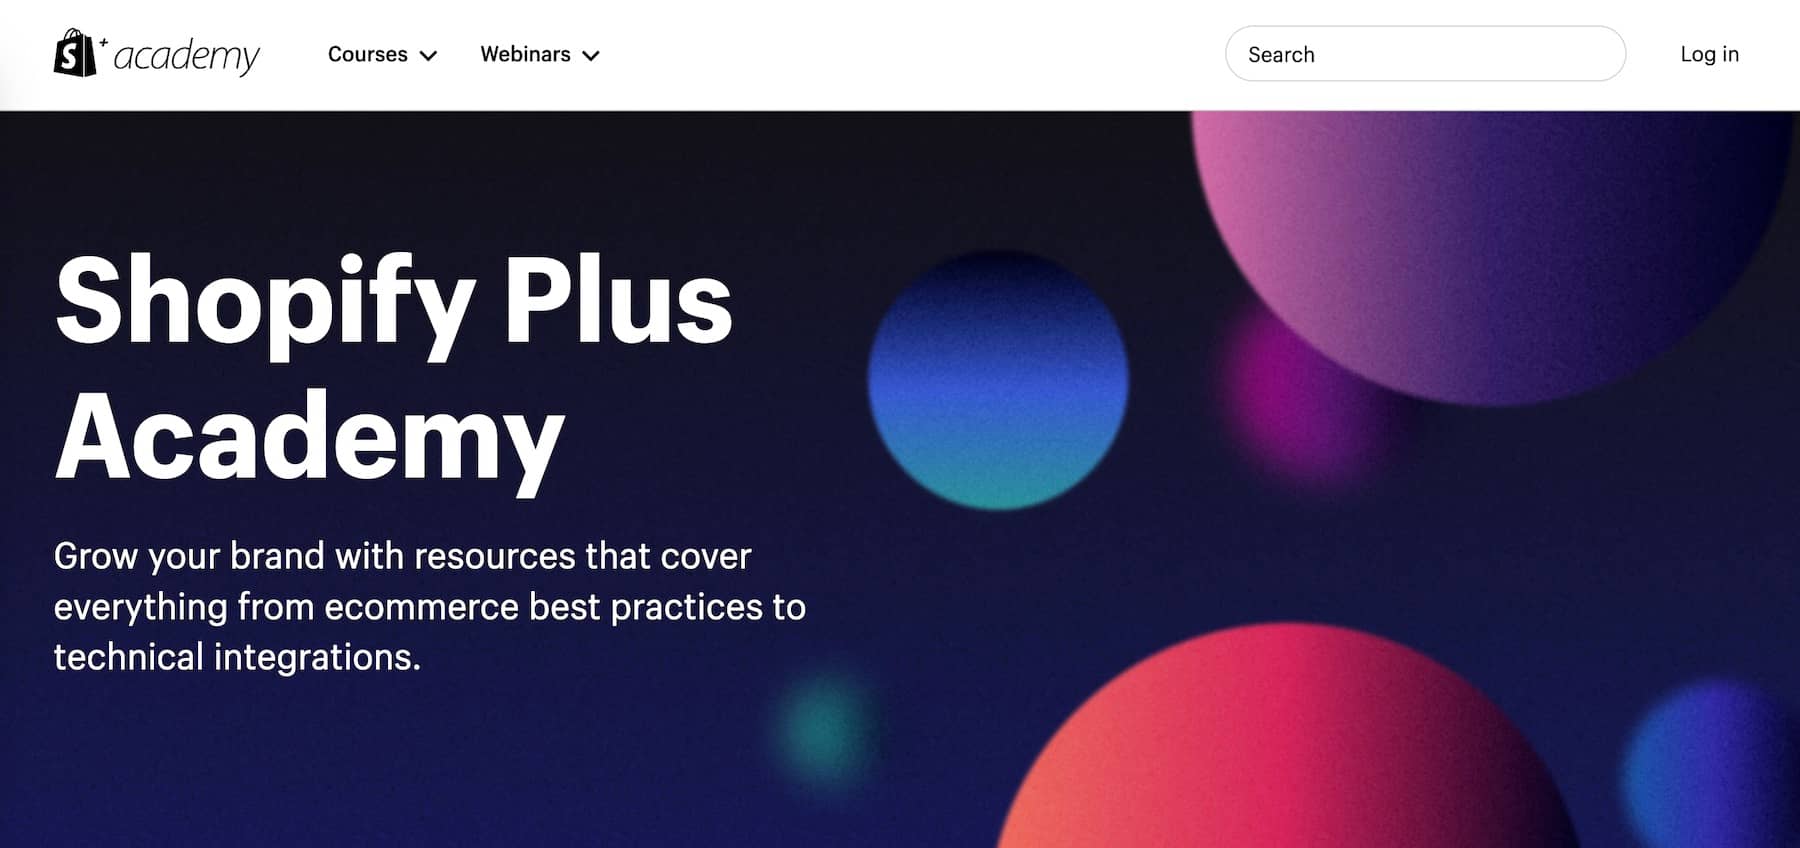 Shopify Plus includes access to the Shopify Plus Academy, a series of resources for best practices and integrations.